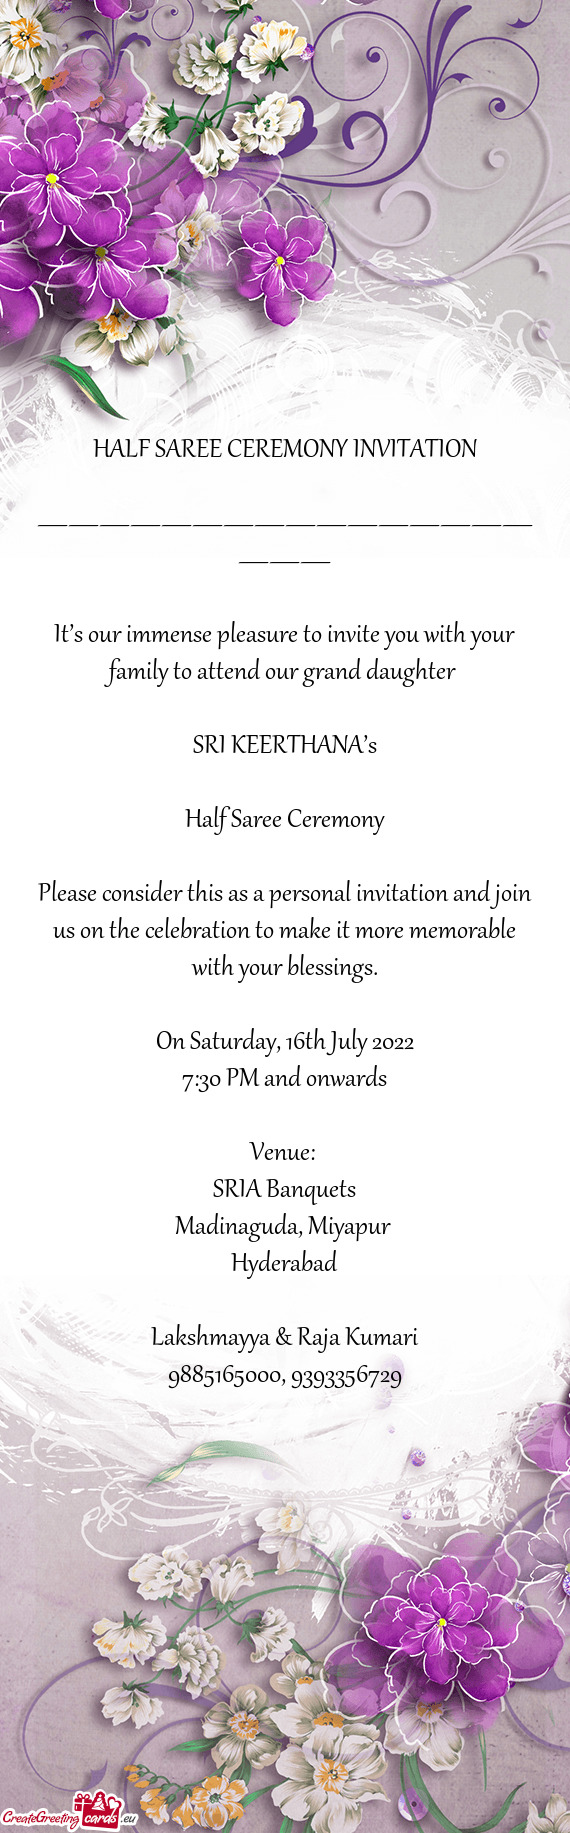 It’s our immense pleasure to invite you with your family to attend our grand daughter